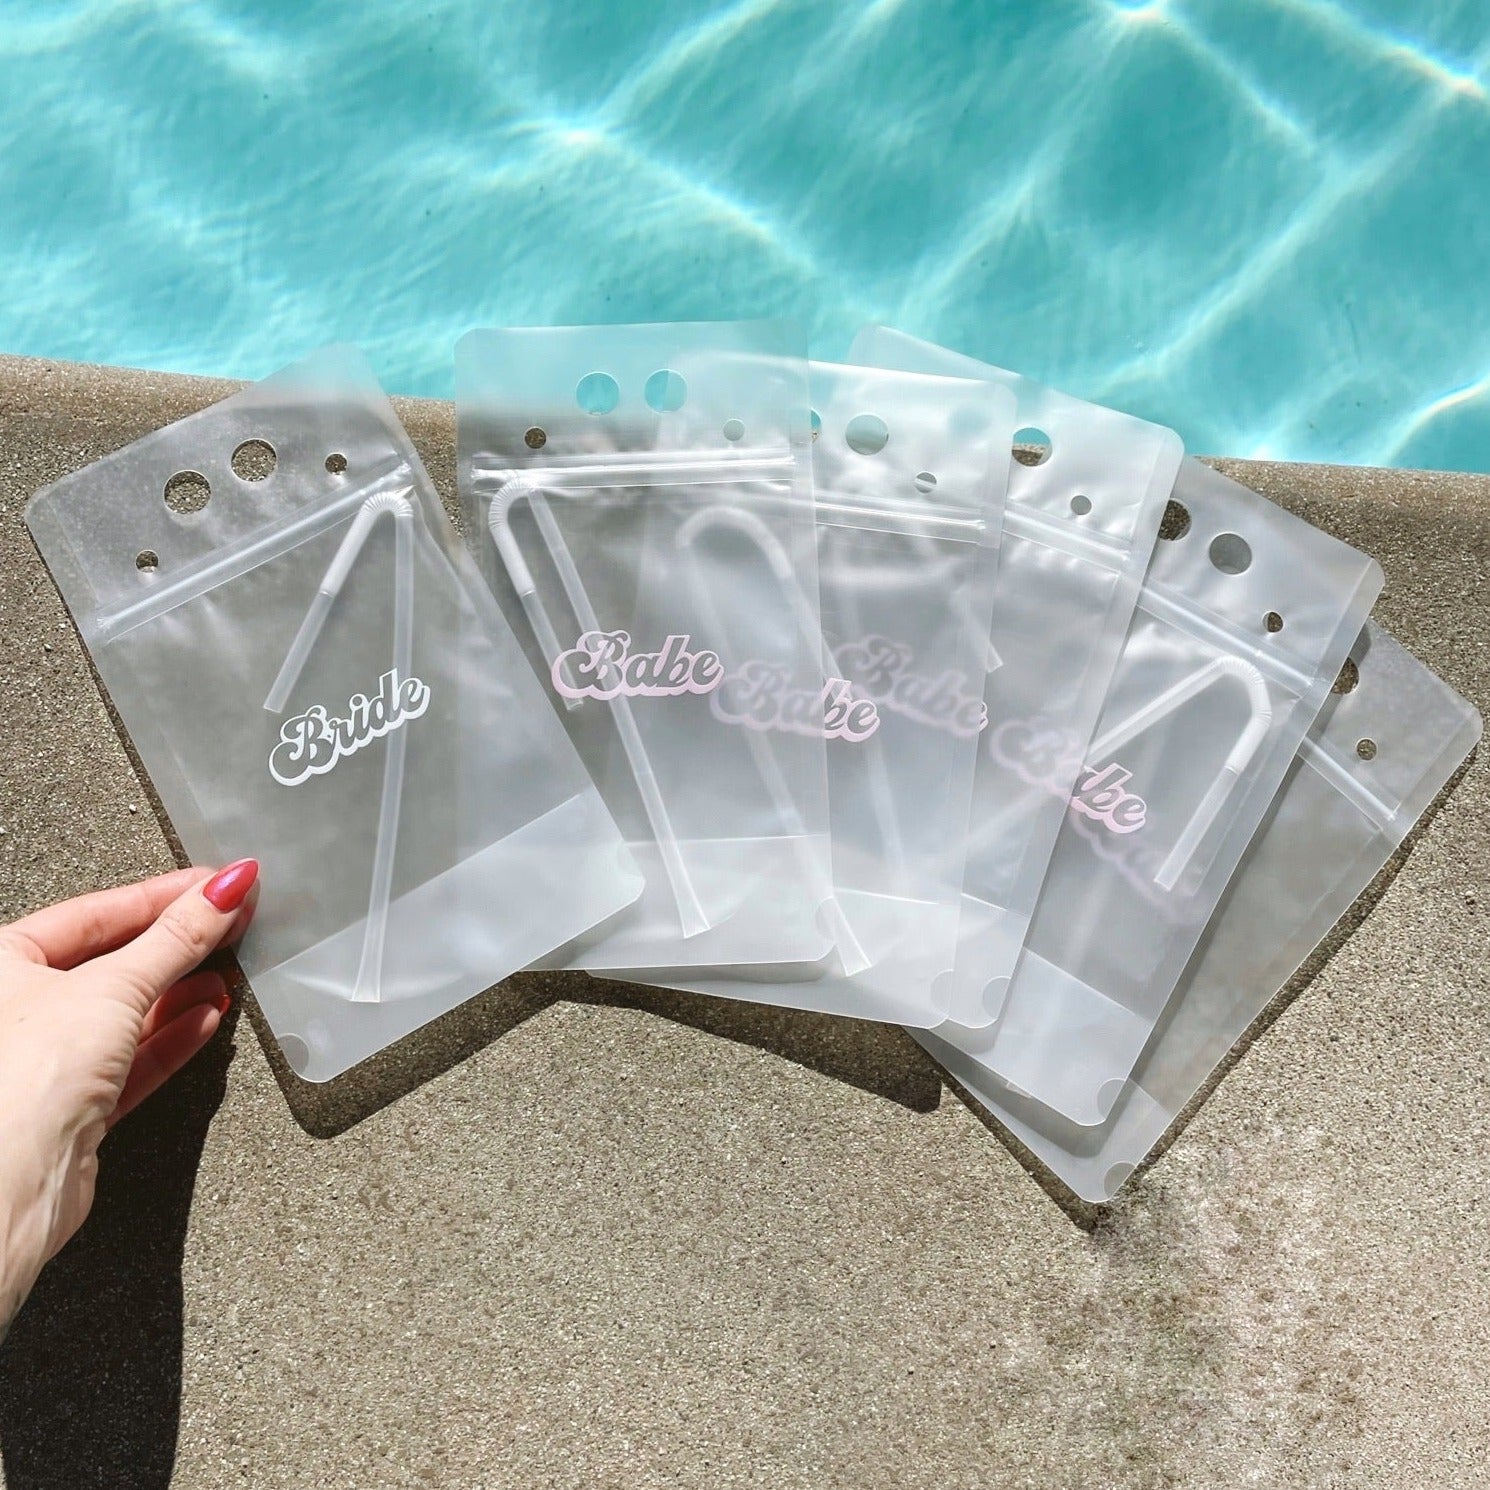 A woman's hand touching a transparent drink pouch that has cursive lettering on the front that reads "Bride" in white text. Next to that pouch are 5 identical pouches that say "Babe" in light pink text across the front. All 6 pouches are laying next to a pool of water.